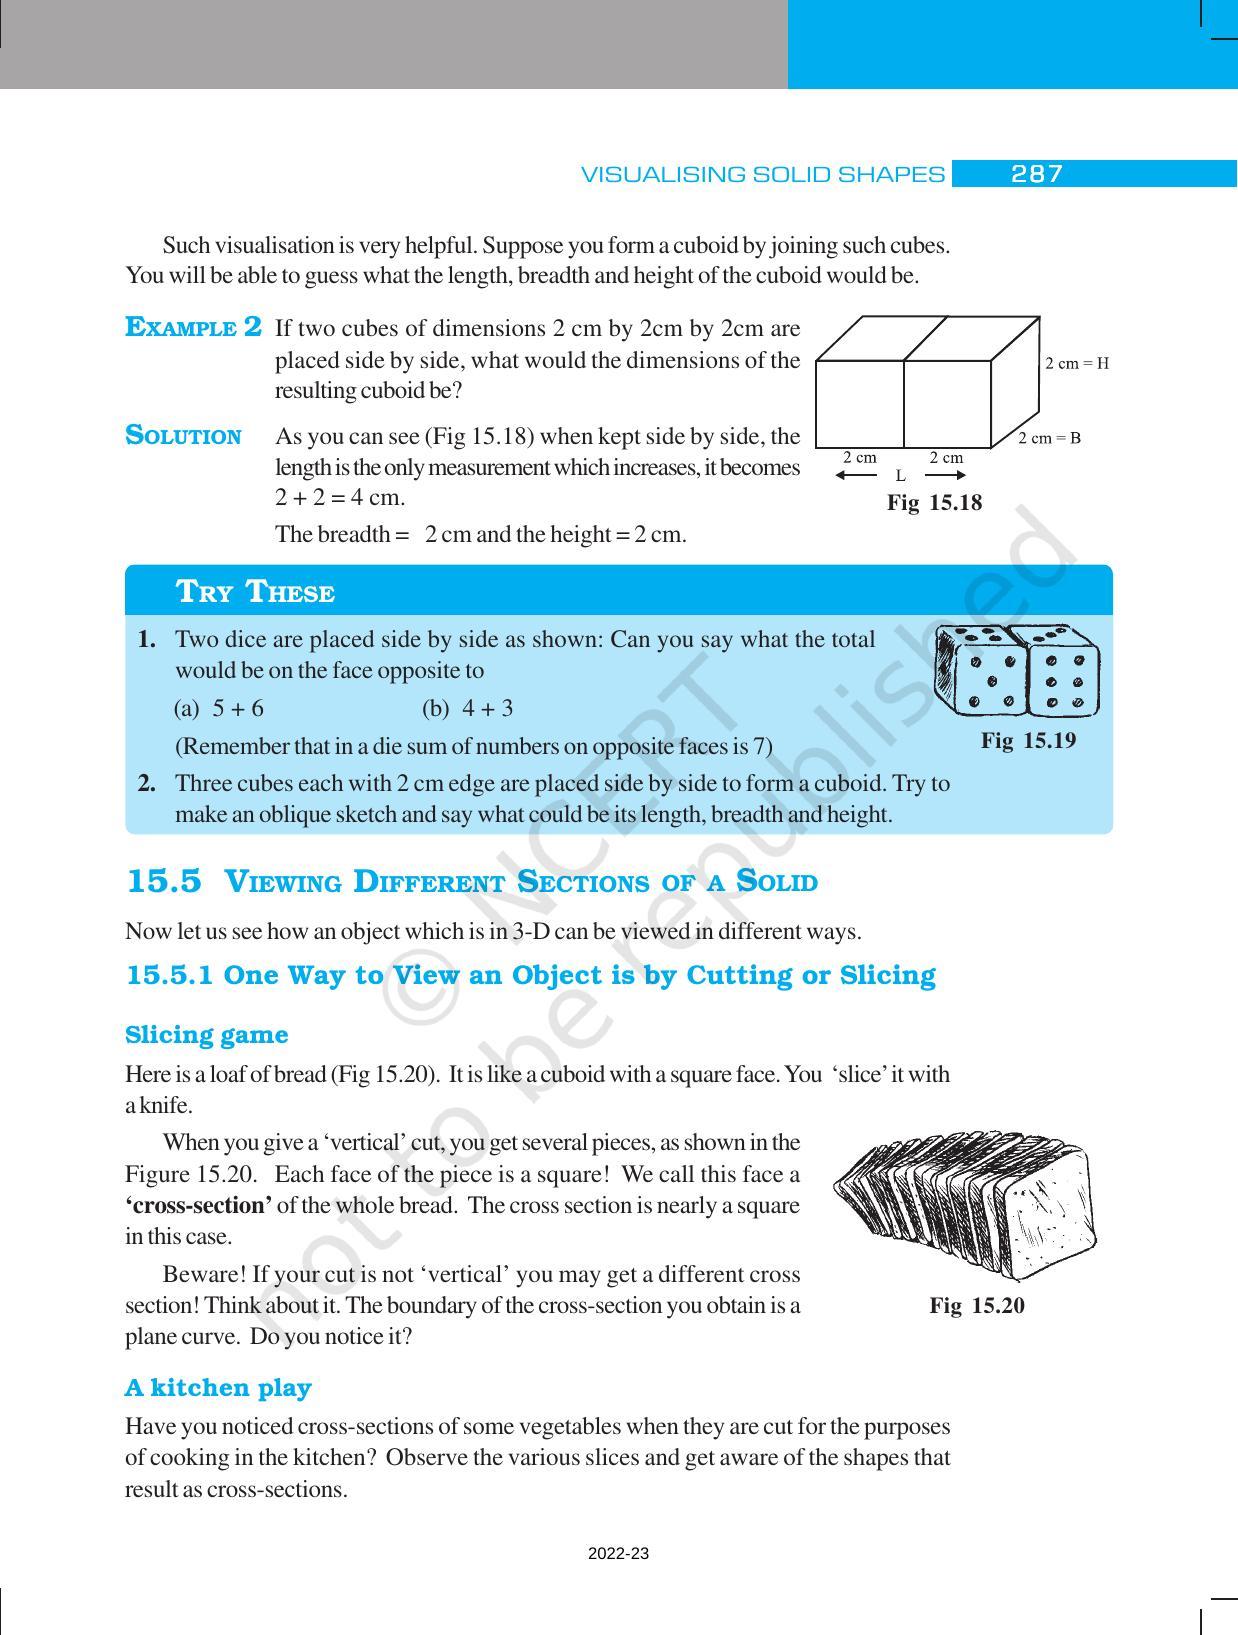 NCERT Book for Class 7 Maths: Chapter 15-Visualising Solid Shapes - Page 11